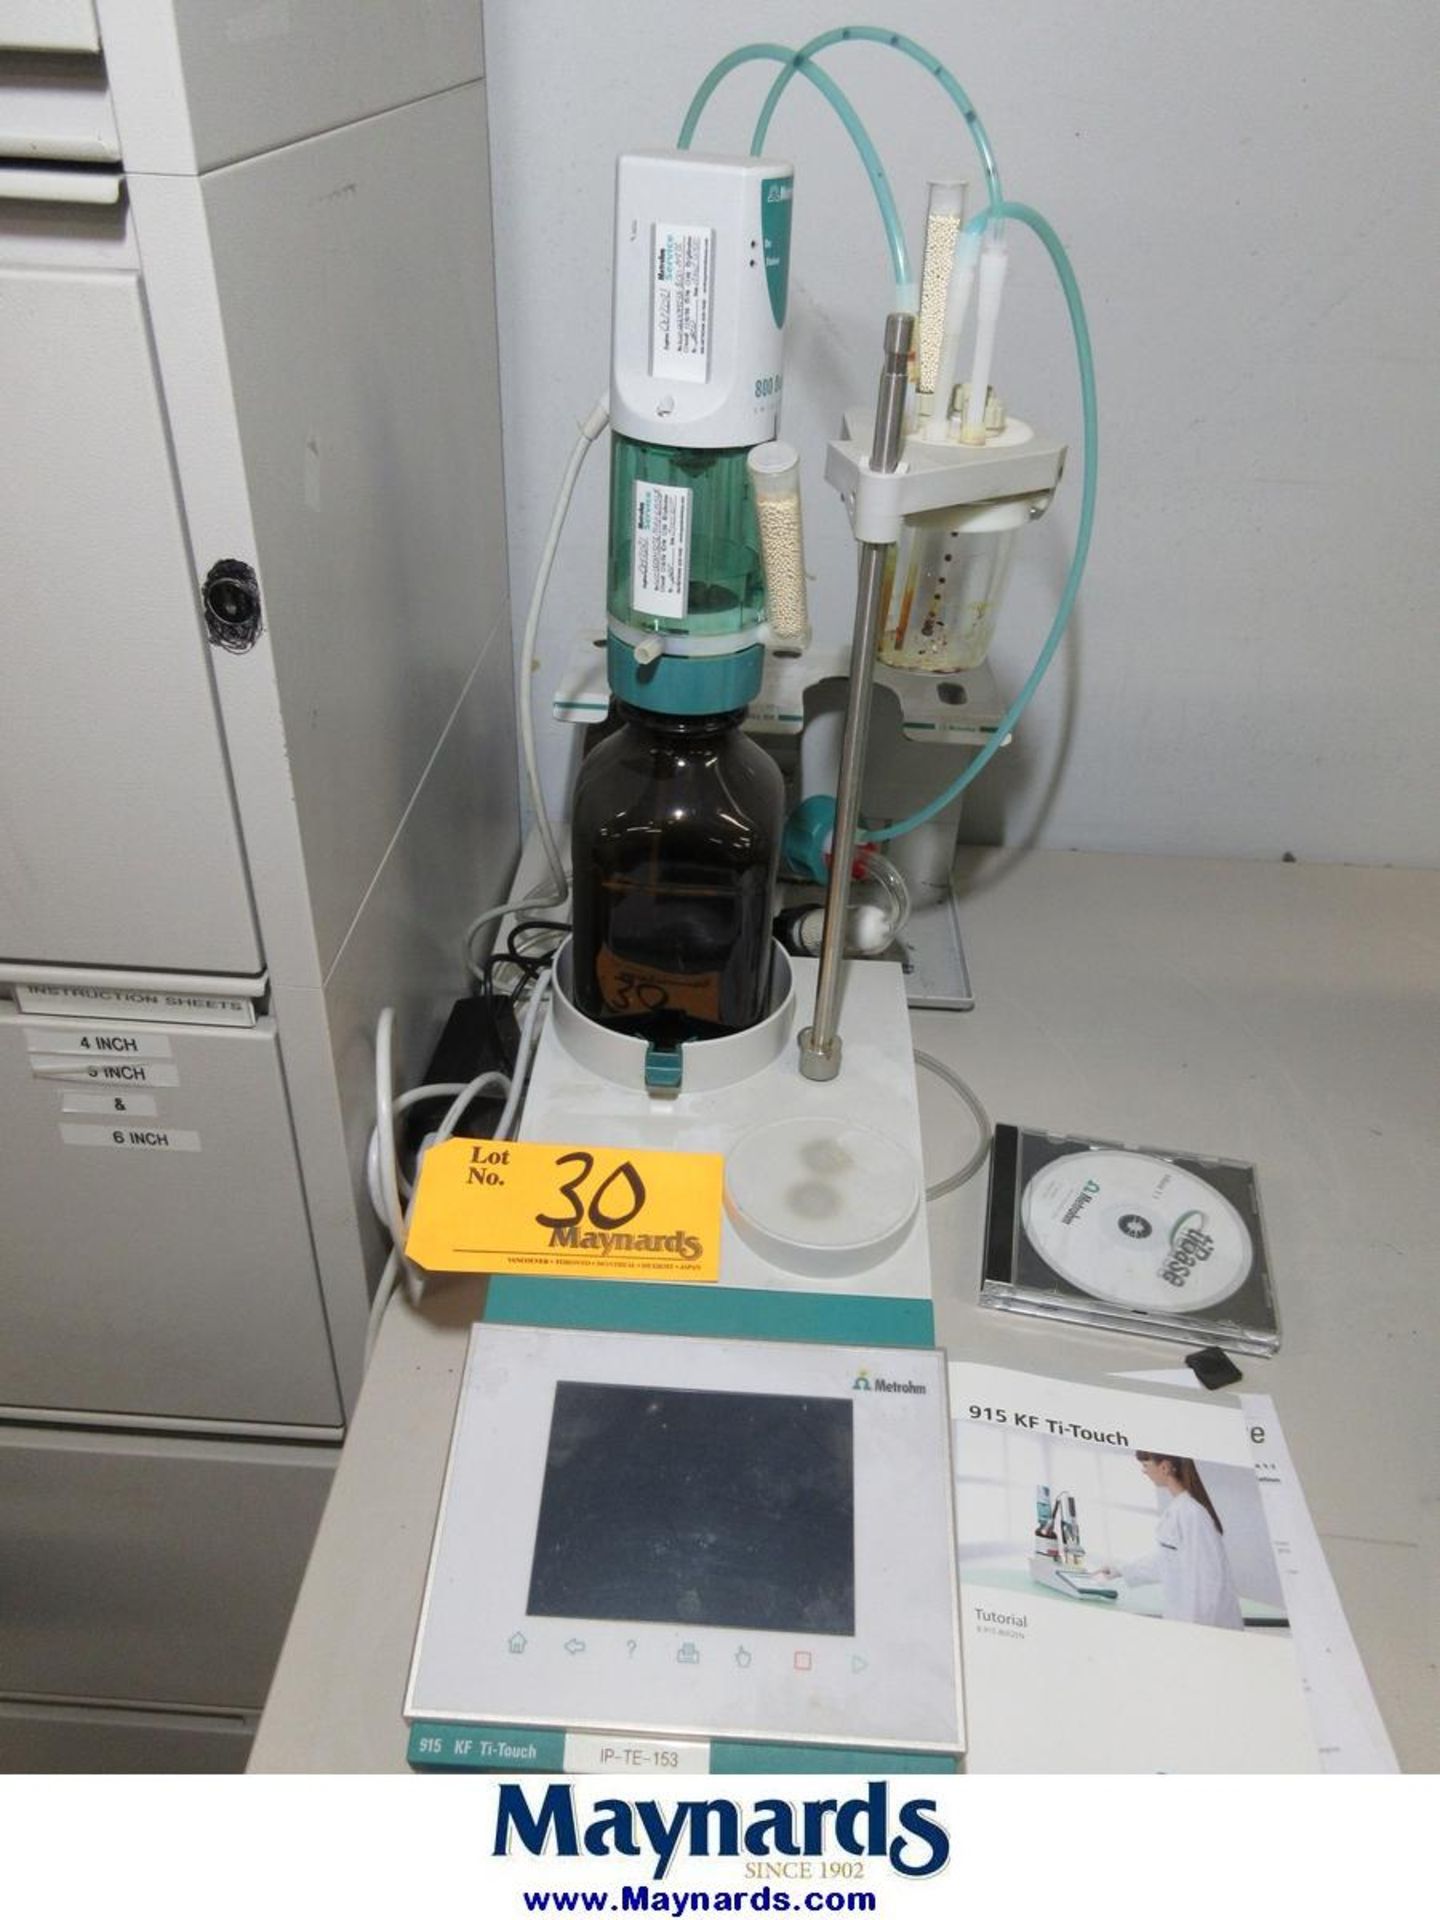 Metrohm 915 KF Ti-Touch Compact Titrator - Image 2 of 6